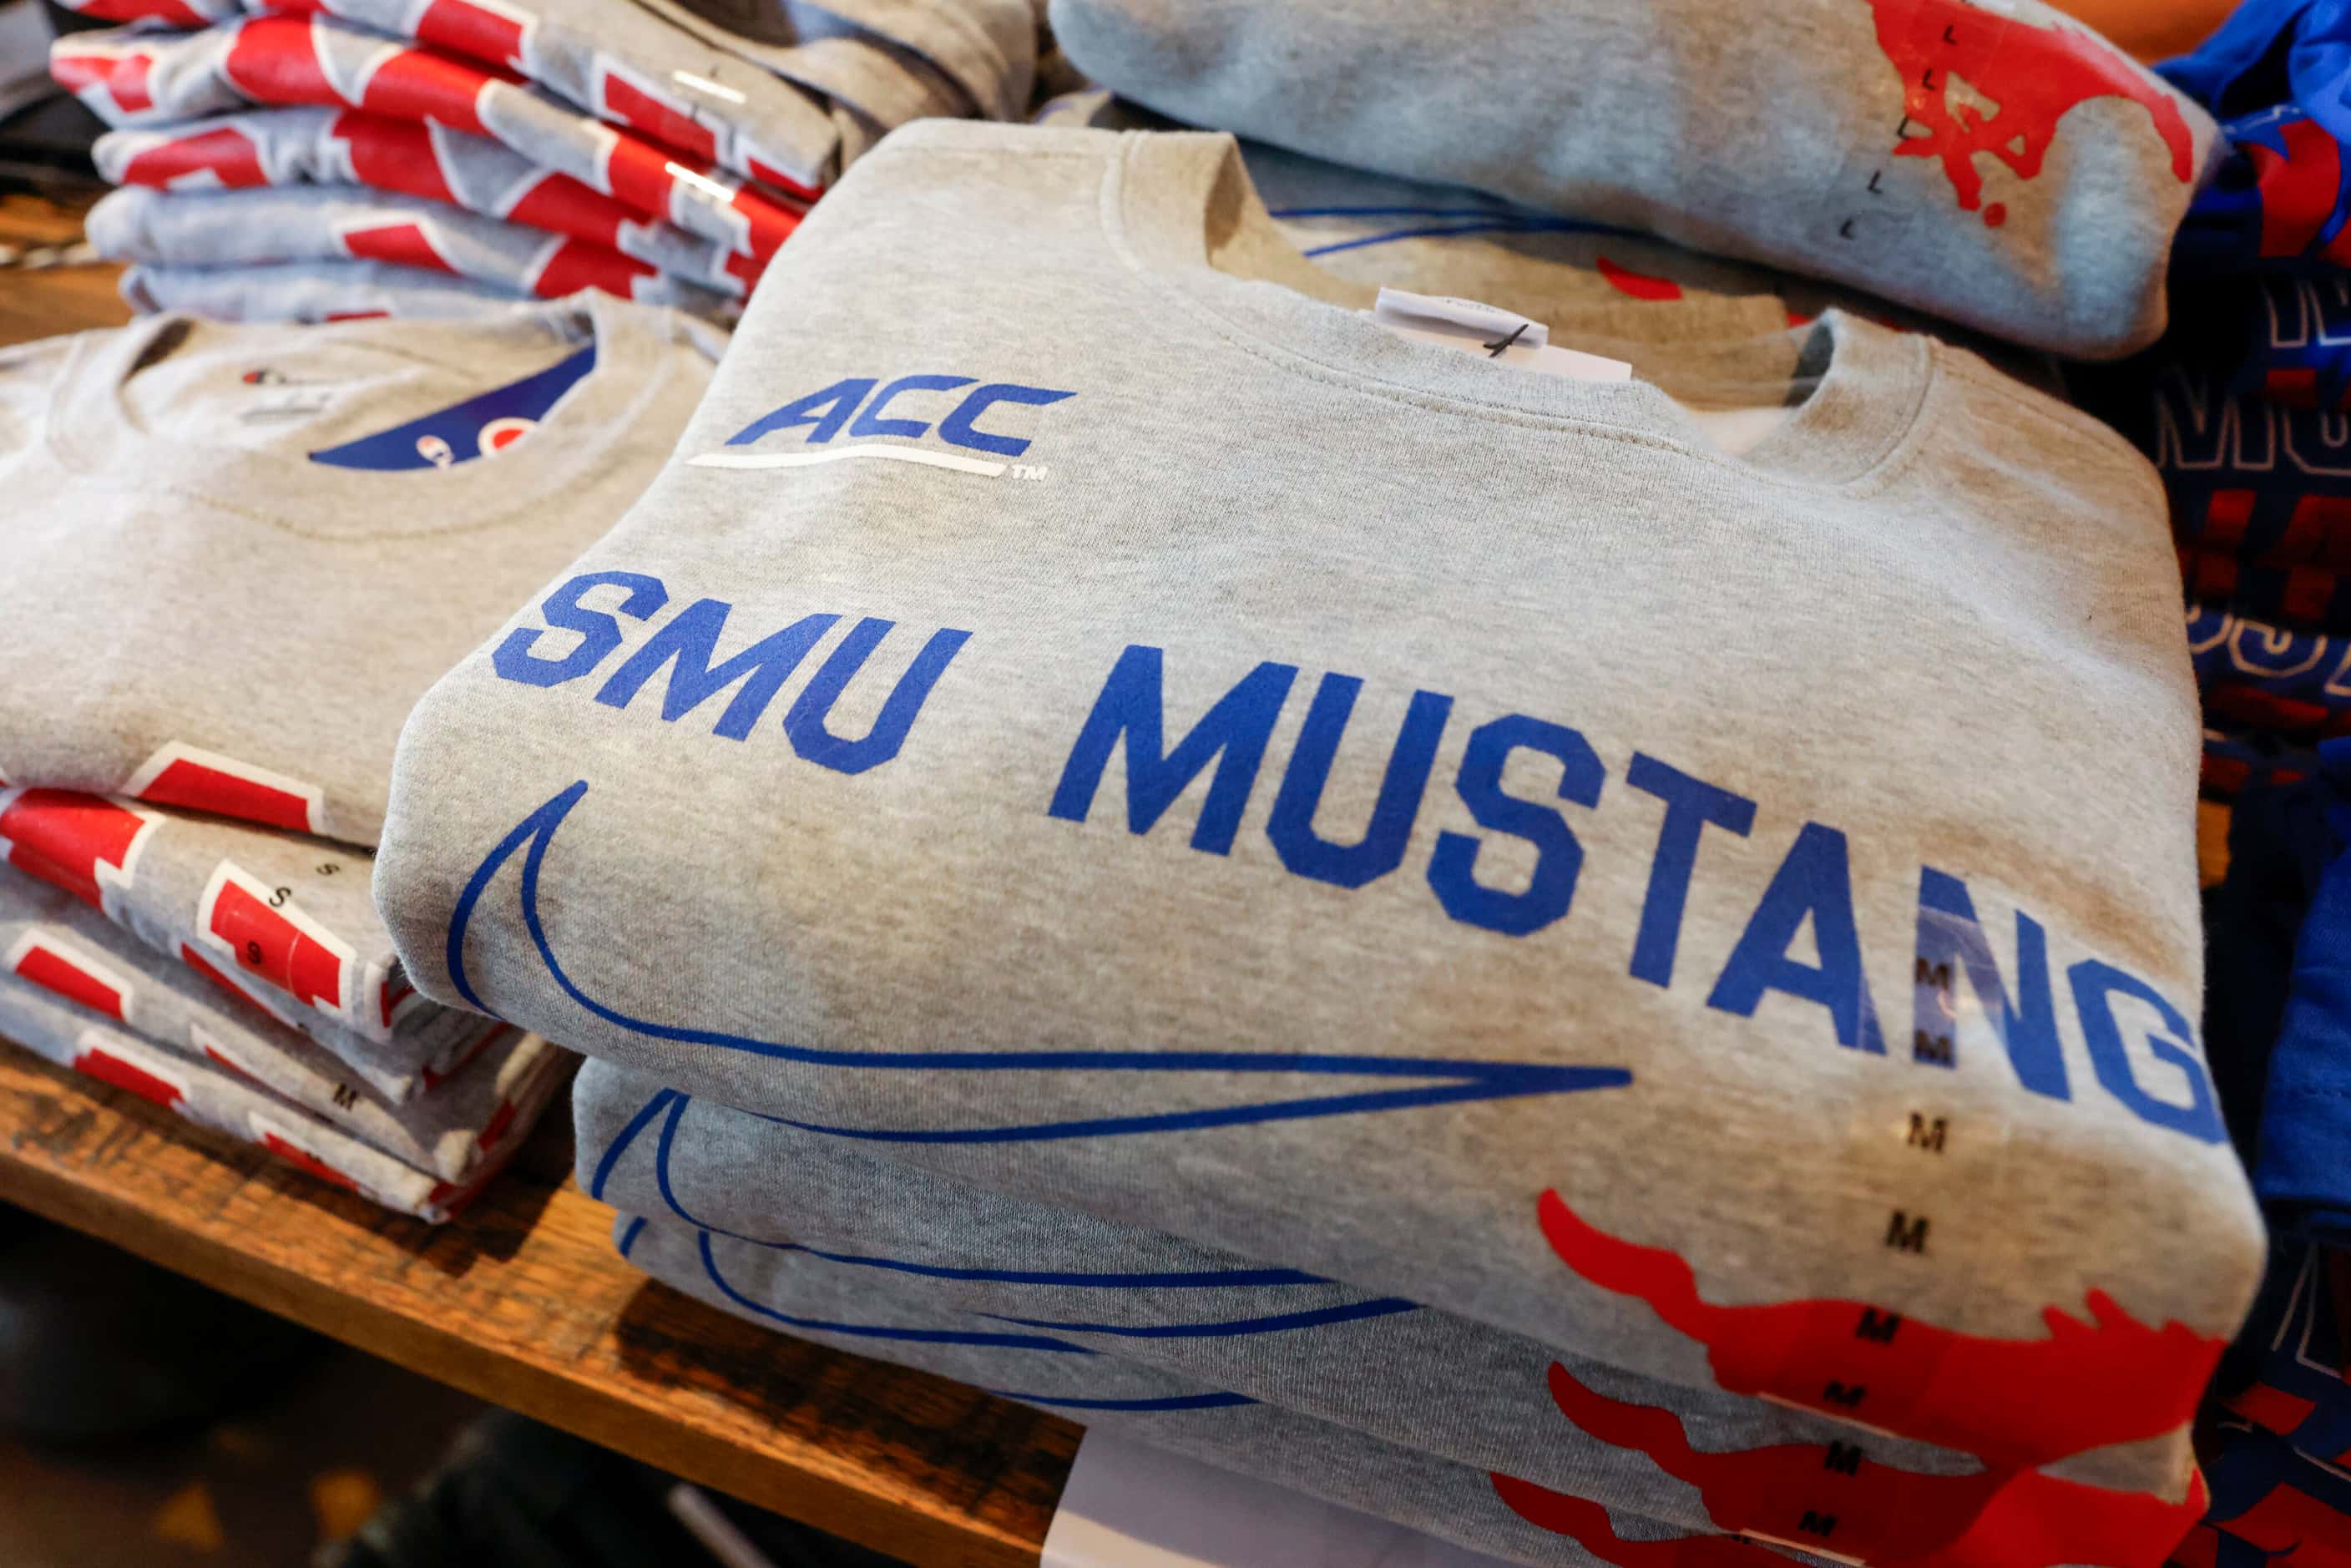 An SMU sweatshirt featuring an ACC logo during a celebration of SMU’s first day in the ACC...